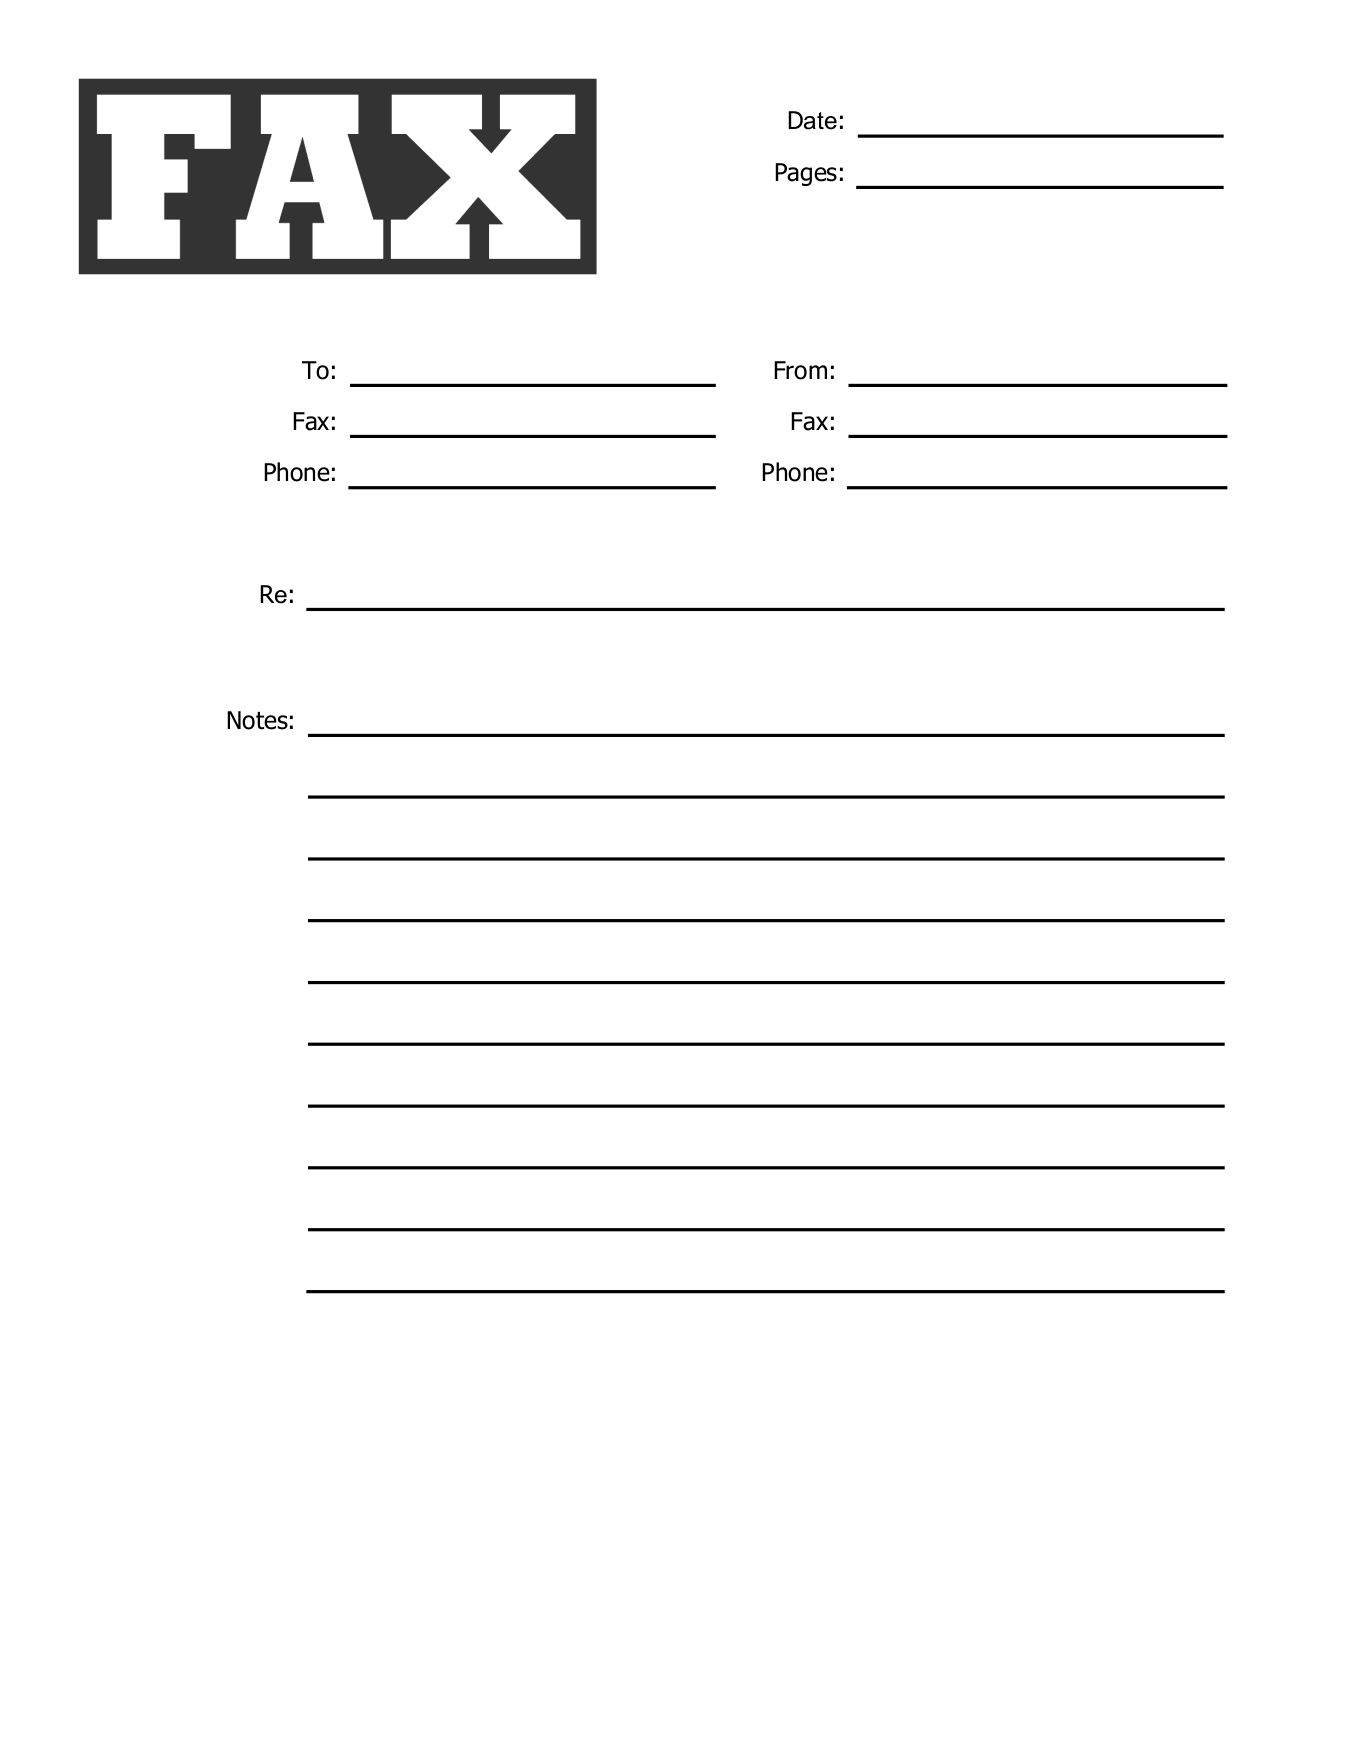 free fax cover sheets faxburner